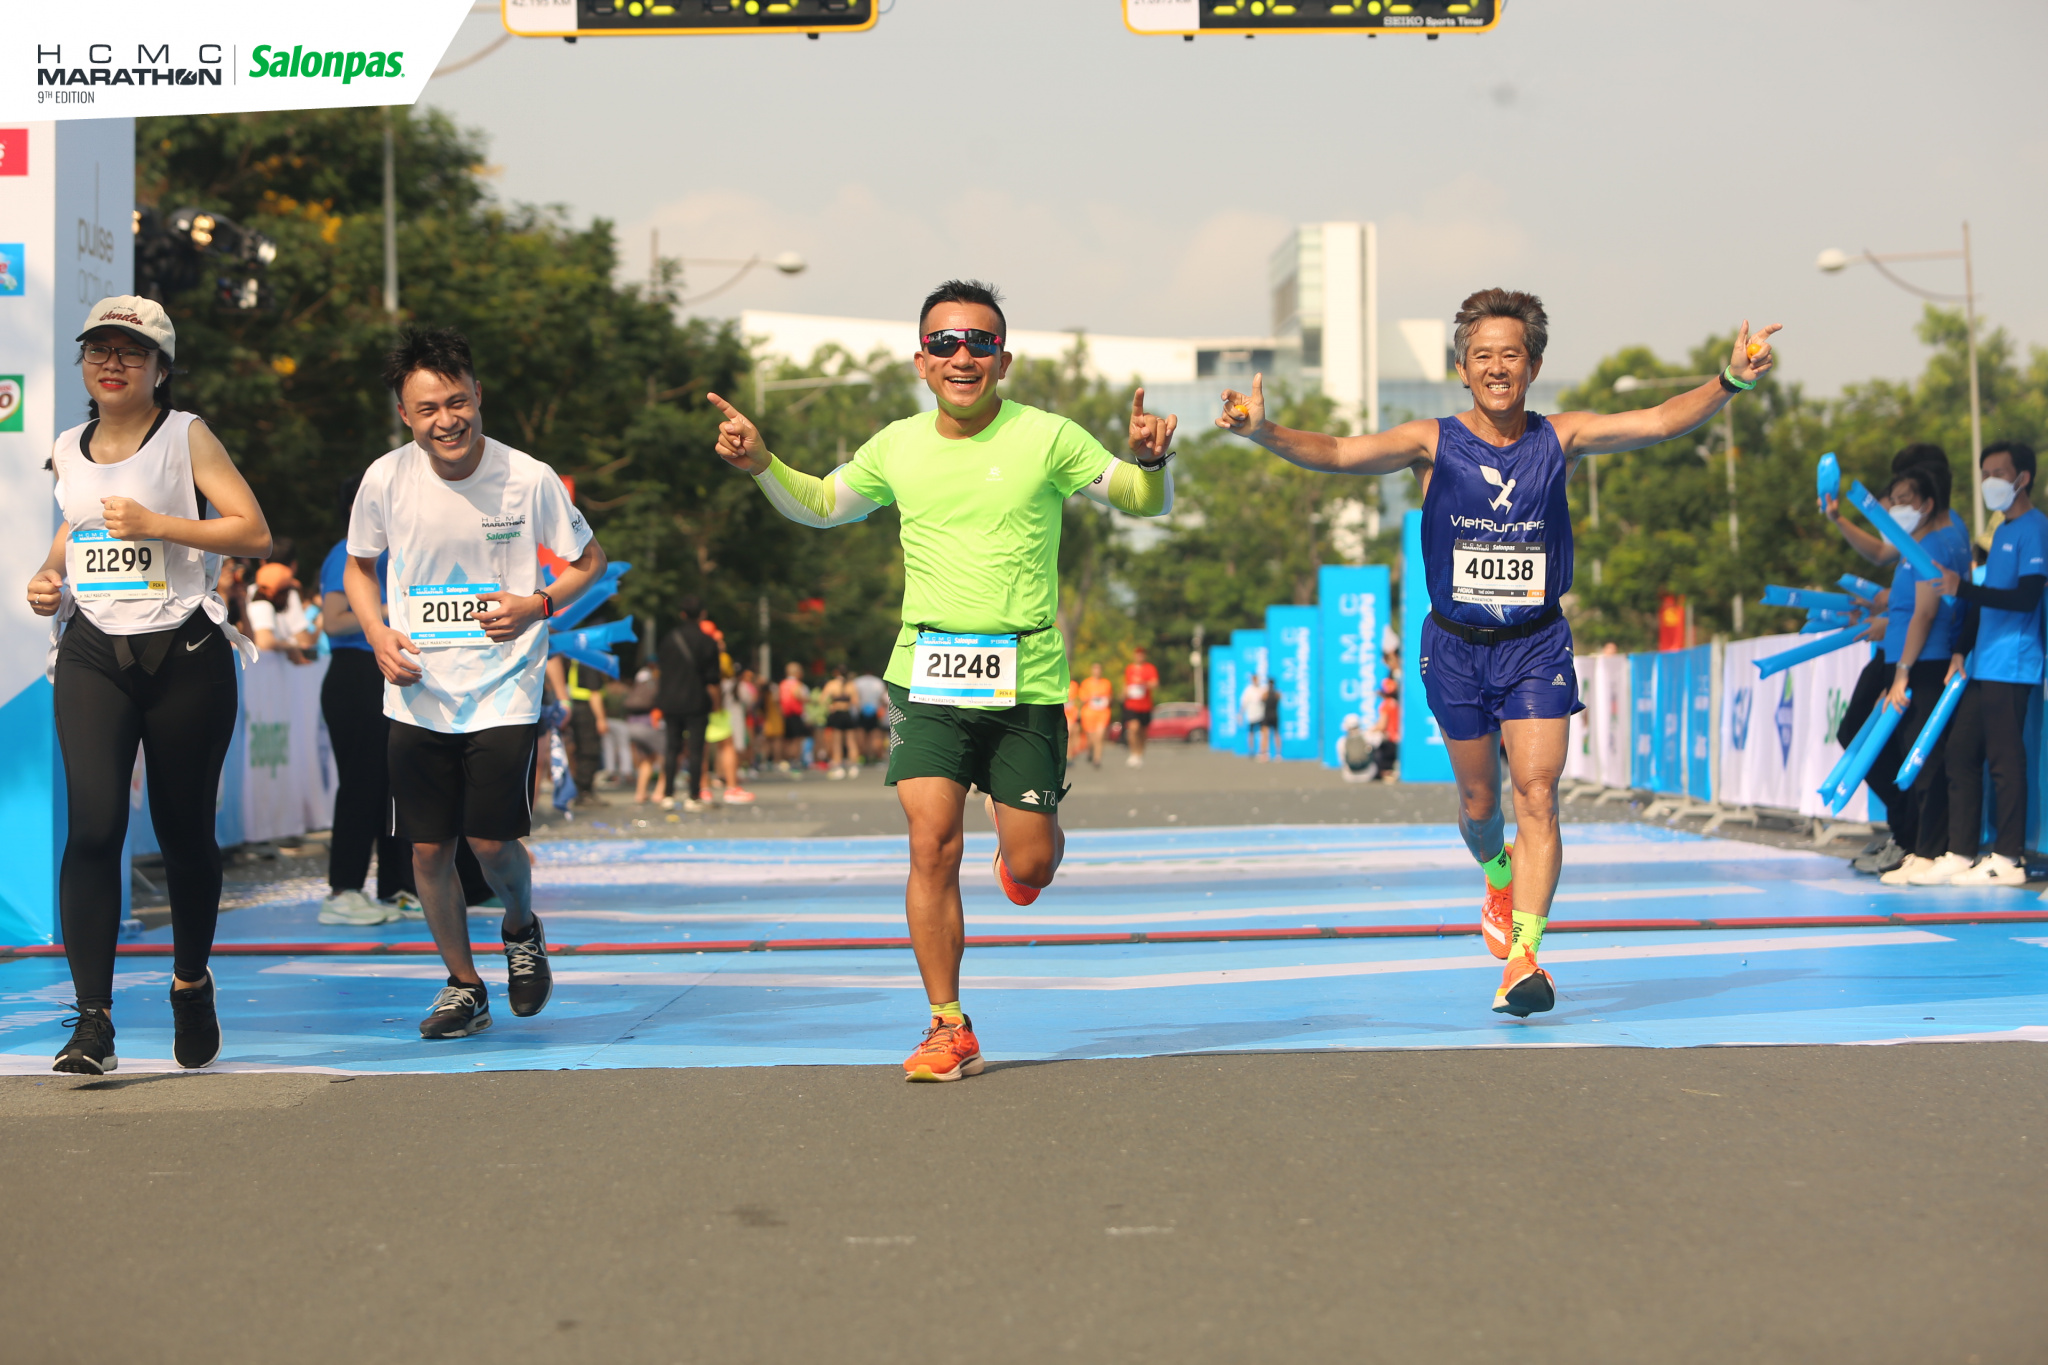 Nguyen The Dung (R) and other runners at the finish line of the HCMC Marathon, April 17, 2022. Photo courtesy of Nguyen The Dung